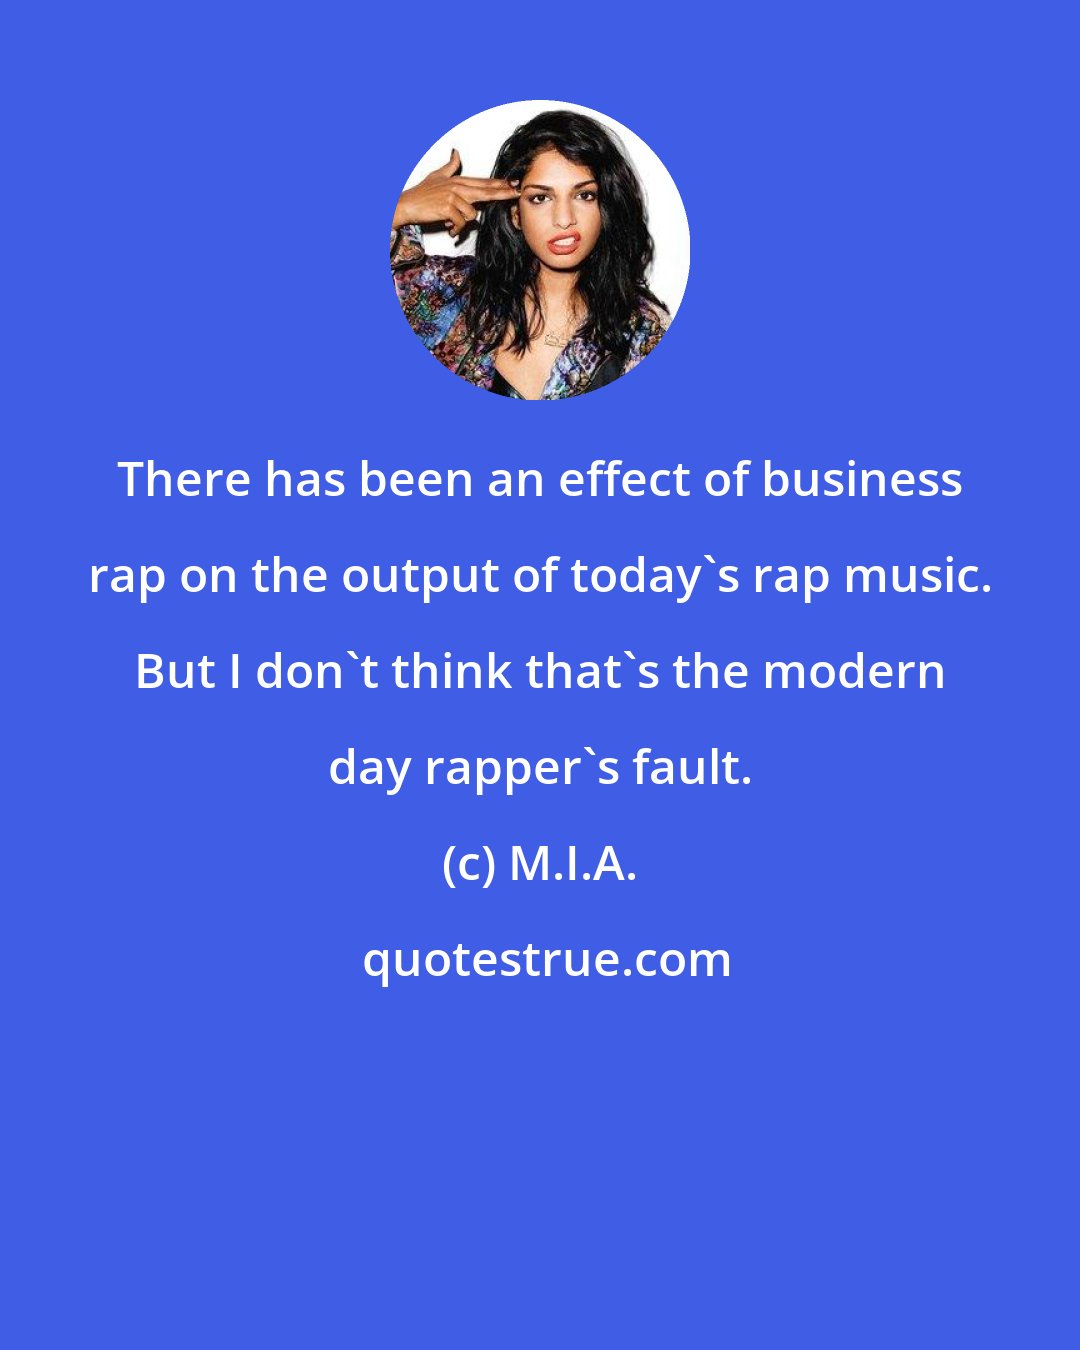 M.I.A.: There has been an effect of business rap on the output of today's rap music. But I don't think that's the modern day rapper's fault.